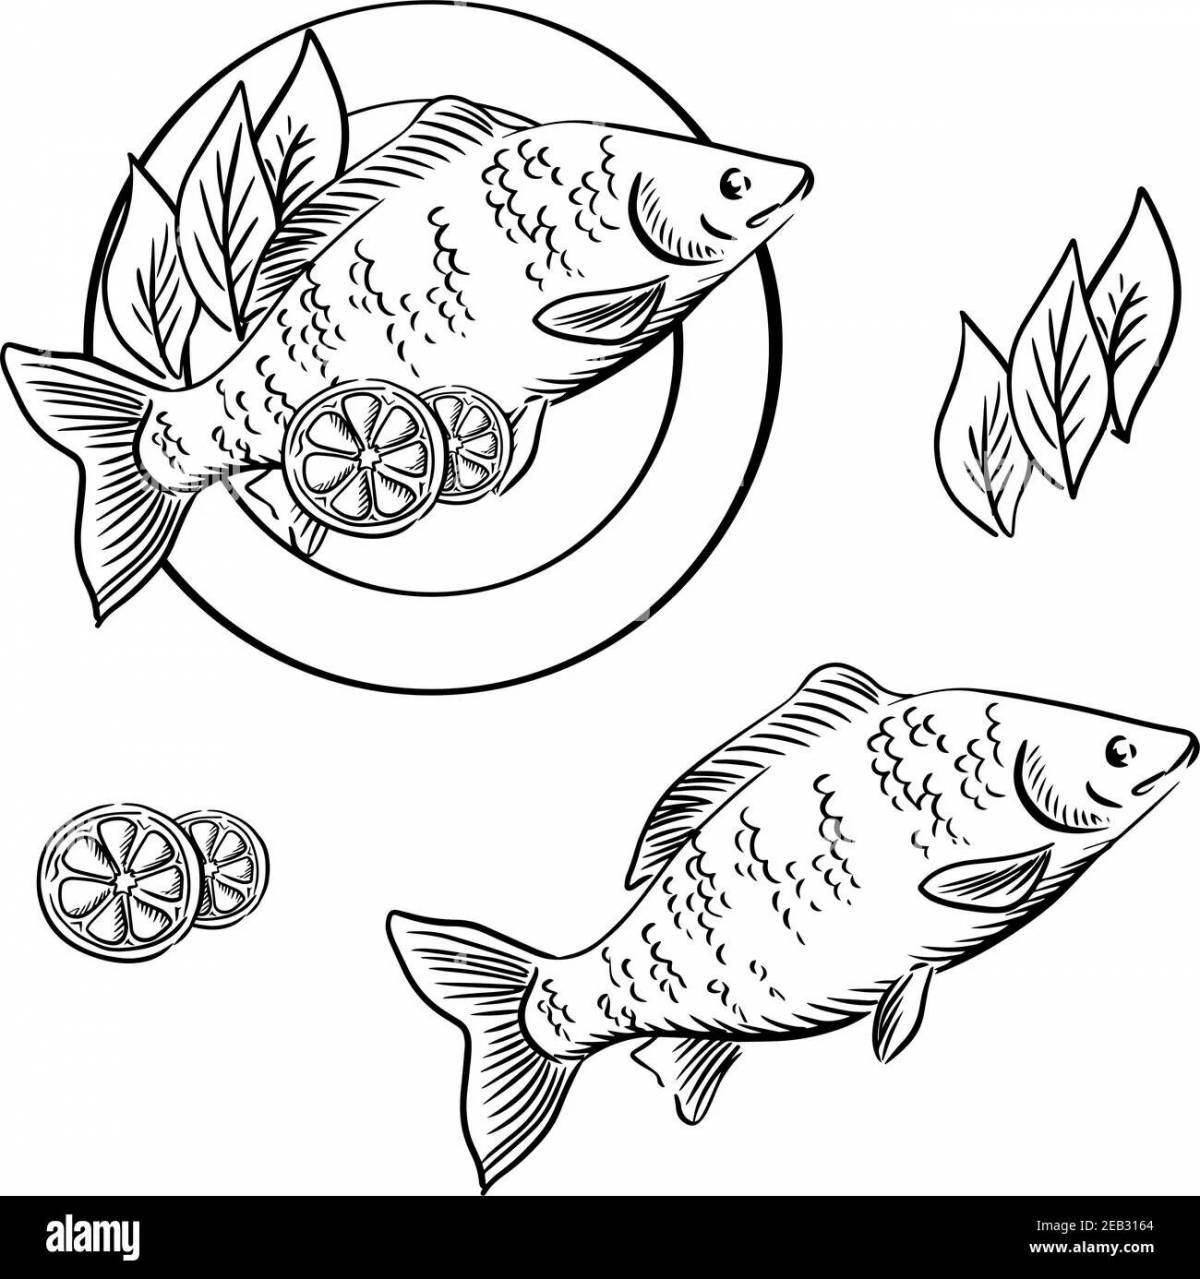 Charming fried fish coloring page